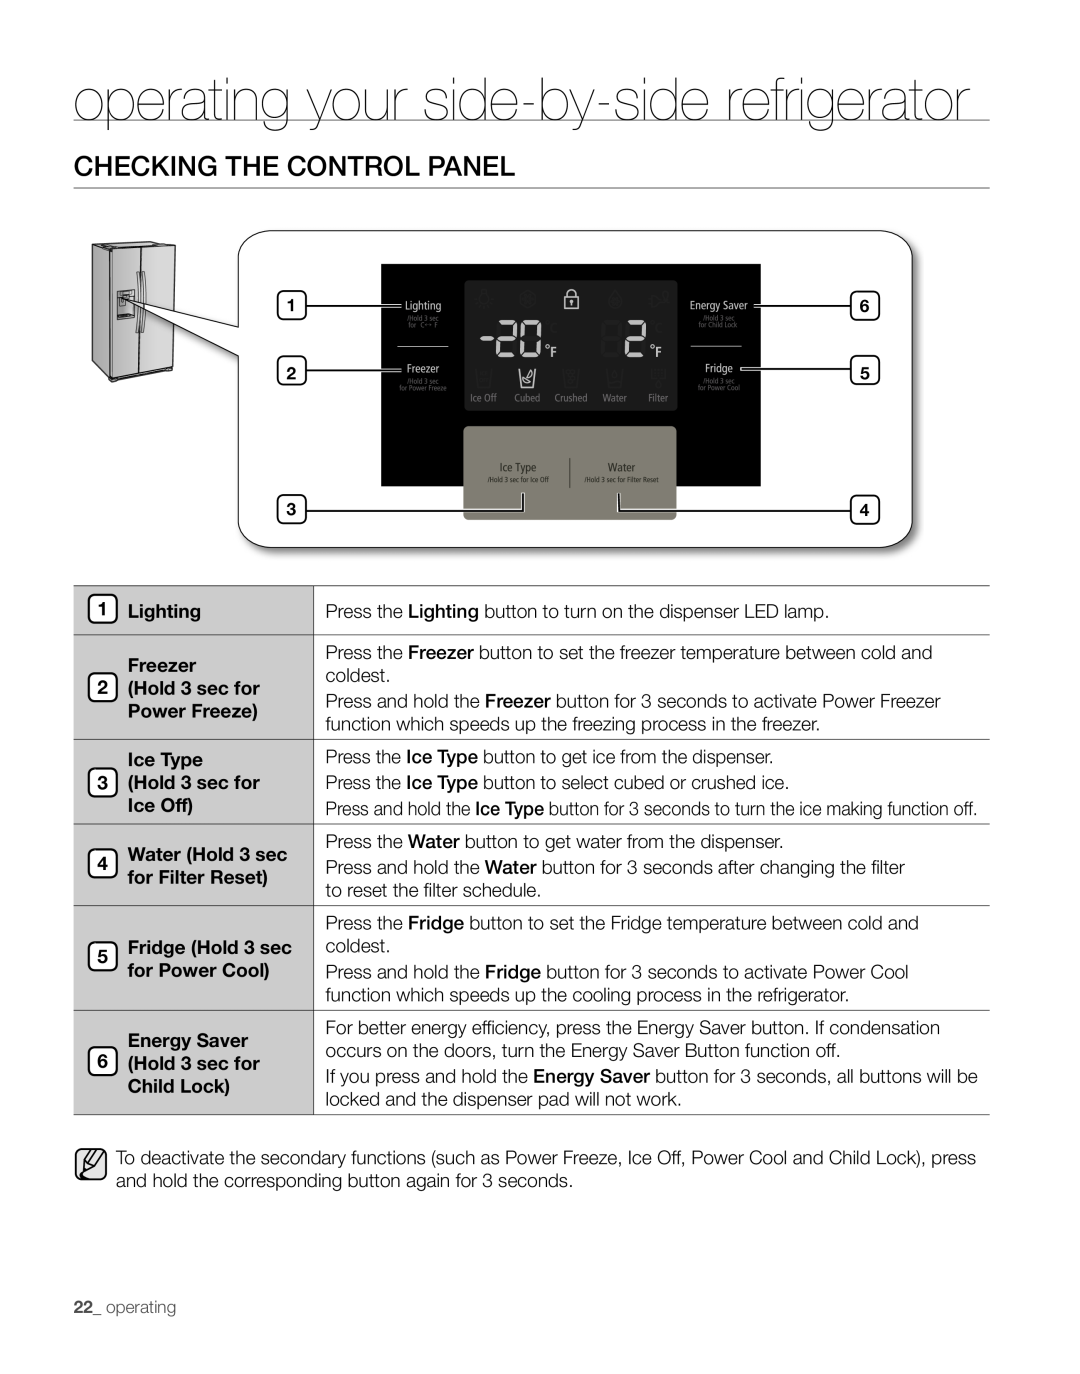 Samsung RS265TD, RS267TD user manual operating your side-by-side refrigerator, Checking The Control Panel 